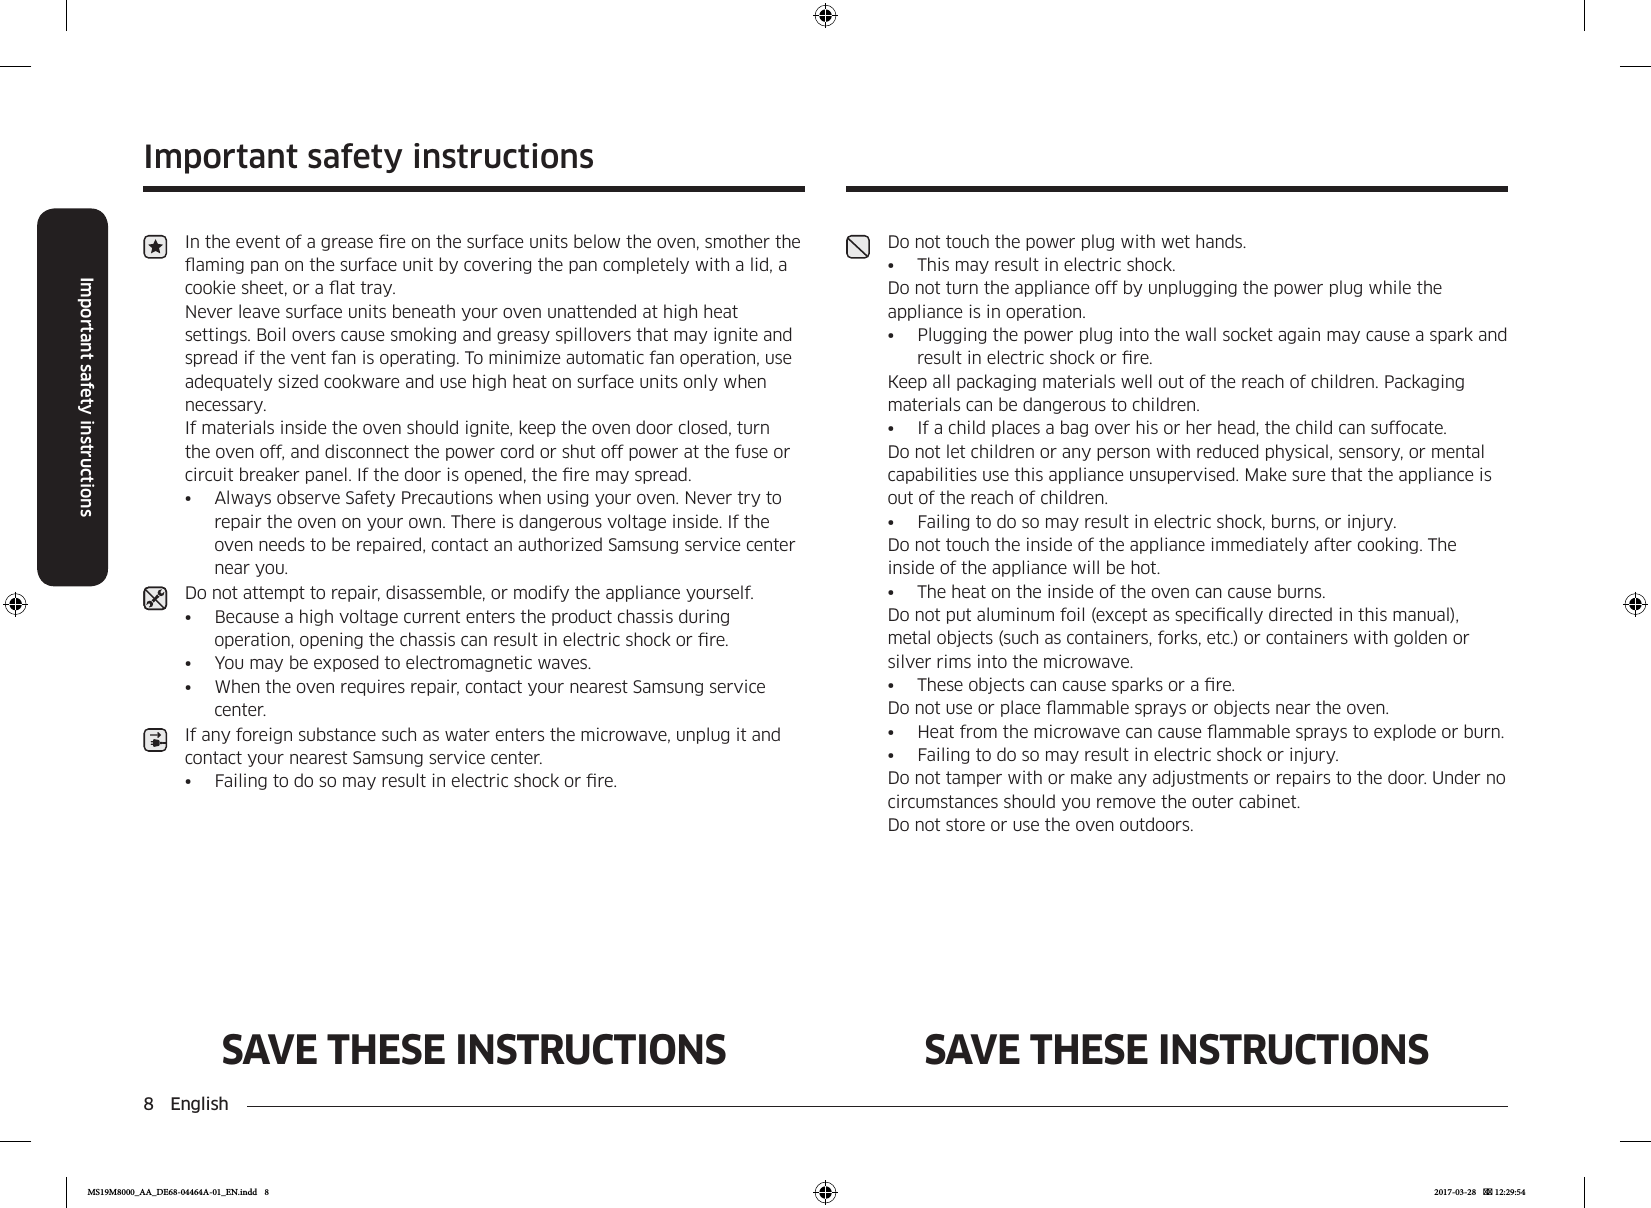 8  EnglishImportant safety instructionsImportant safety instructionsSAVE THESE INSTRUCTIONS SAVE THESE INSTRUCTIONSIn the event of a grease re on the surface units below the oven, smother the aming pan on the surface unit by covering the pan completely with a lid, a cookie sheet, or a at tray. Never leave surface units beneath your oven unattended at high heat settings. Boil overs cause smoking and greasy spillovers that may ignite and spread if the vent fan is operating. To minimize automatic fan operation, use adequately sized cookware and use high heat on surface units only when necessary.If materials inside the oven should ignite, keep the oven door closed, turn the oven off, and disconnect the power cord or shut off power at the fuse or circuit breaker panel. If the door is opened, the re may spread.•  Always observe Safety Precautions when using your oven. Never try to repair the oven on your own. There is dangerous voltage inside. If the oven needs to be repaired, contact an authorized Samsung service center near you.Do not attempt to repair, disassemble, or modify the appliance yourself.•  Because a high voltage current enters the product chassis during operation, opening the chassis can result in electric shock or re.•  You may be exposed to electromagnetic waves.•  When the oven requires repair, contact your nearest Samsung service center.If any foreign substance such as water enters the microwave, unplug it and contact your nearest Samsung service center.•  Failing to do so may result in electric shock or re.Do not touch the power plug with wet hands.•  This may result in electric shock.Do not turn the appliance off by unplugging the power plug while the appliance is in operation.•  Plugging the power plug into the wall socket again may cause a spark and result in electric shock or re.Keep all packaging materials well out of the reach of children. Packaging materials can be dangerous to children.•  If a child places a bag over his or her head, the child can suffocate.Do not let children or any person with reduced physical, sensory, or mental capabilities use this appliance unsupervised. Make sure that the appliance is out of the reach of children.•  Failing to do so may result in electric shock, burns, or injury.Do not touch the inside of the appliance immediately after cooking. The inside of the appliance will be hot.•  The heat on the inside of the oven can cause burns.Do not put aluminum foil (except as specically directed in this manual), metal objects (such as containers, forks, etc.) or containers with golden or silver rims into the microwave.•  These objects can cause sparks or a re.Do not use or place ammable sprays or objects near the oven.•  Heat from the microwave can cause ammable sprays to explode or burn.•  Failing to do so may result in electric shock or injury.Do not tamper with or make any adjustments or repairs to the door. Under no circumstances should you remove the outer cabinet.Do not store or use the oven outdoors.MS19M8000_AA_DE68-04464A-01_EN.indd   8 2017-03-28    12:29:54